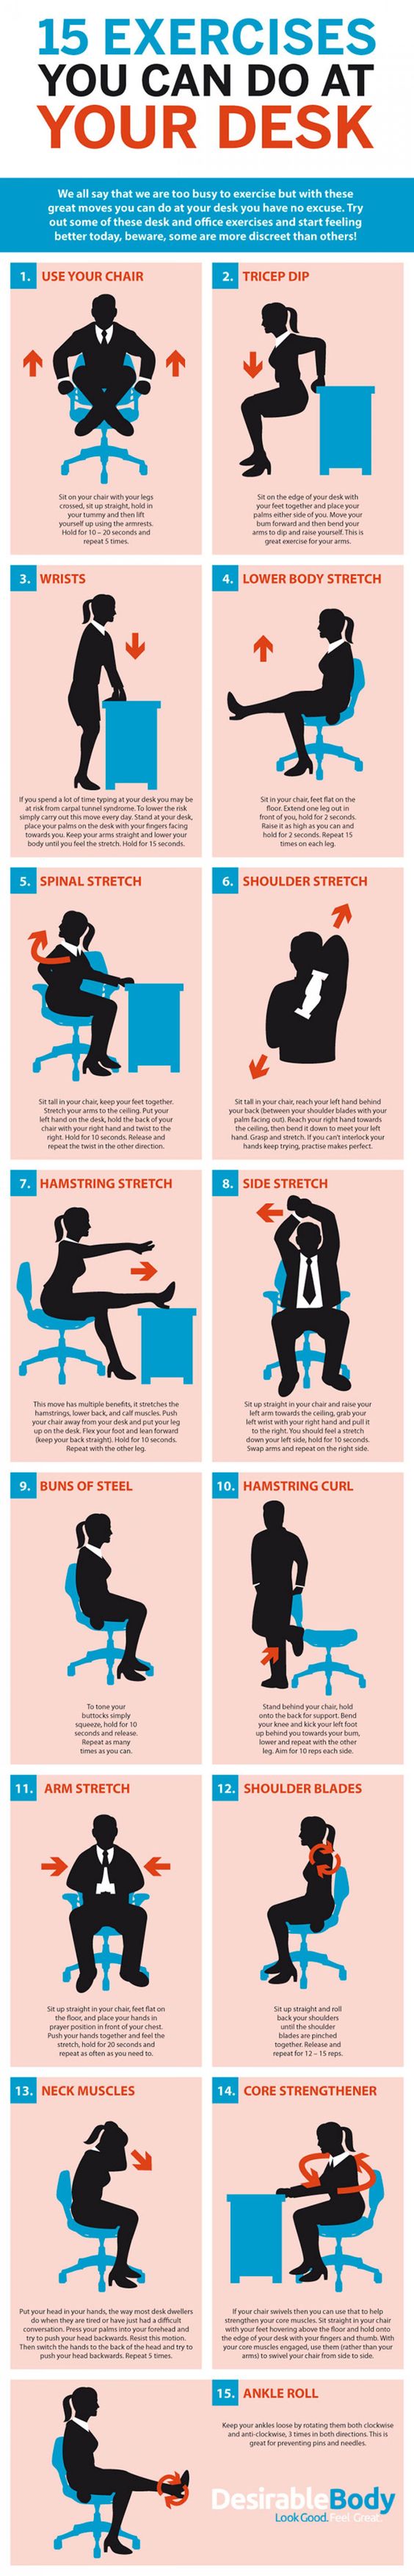 office exercises how to infographic